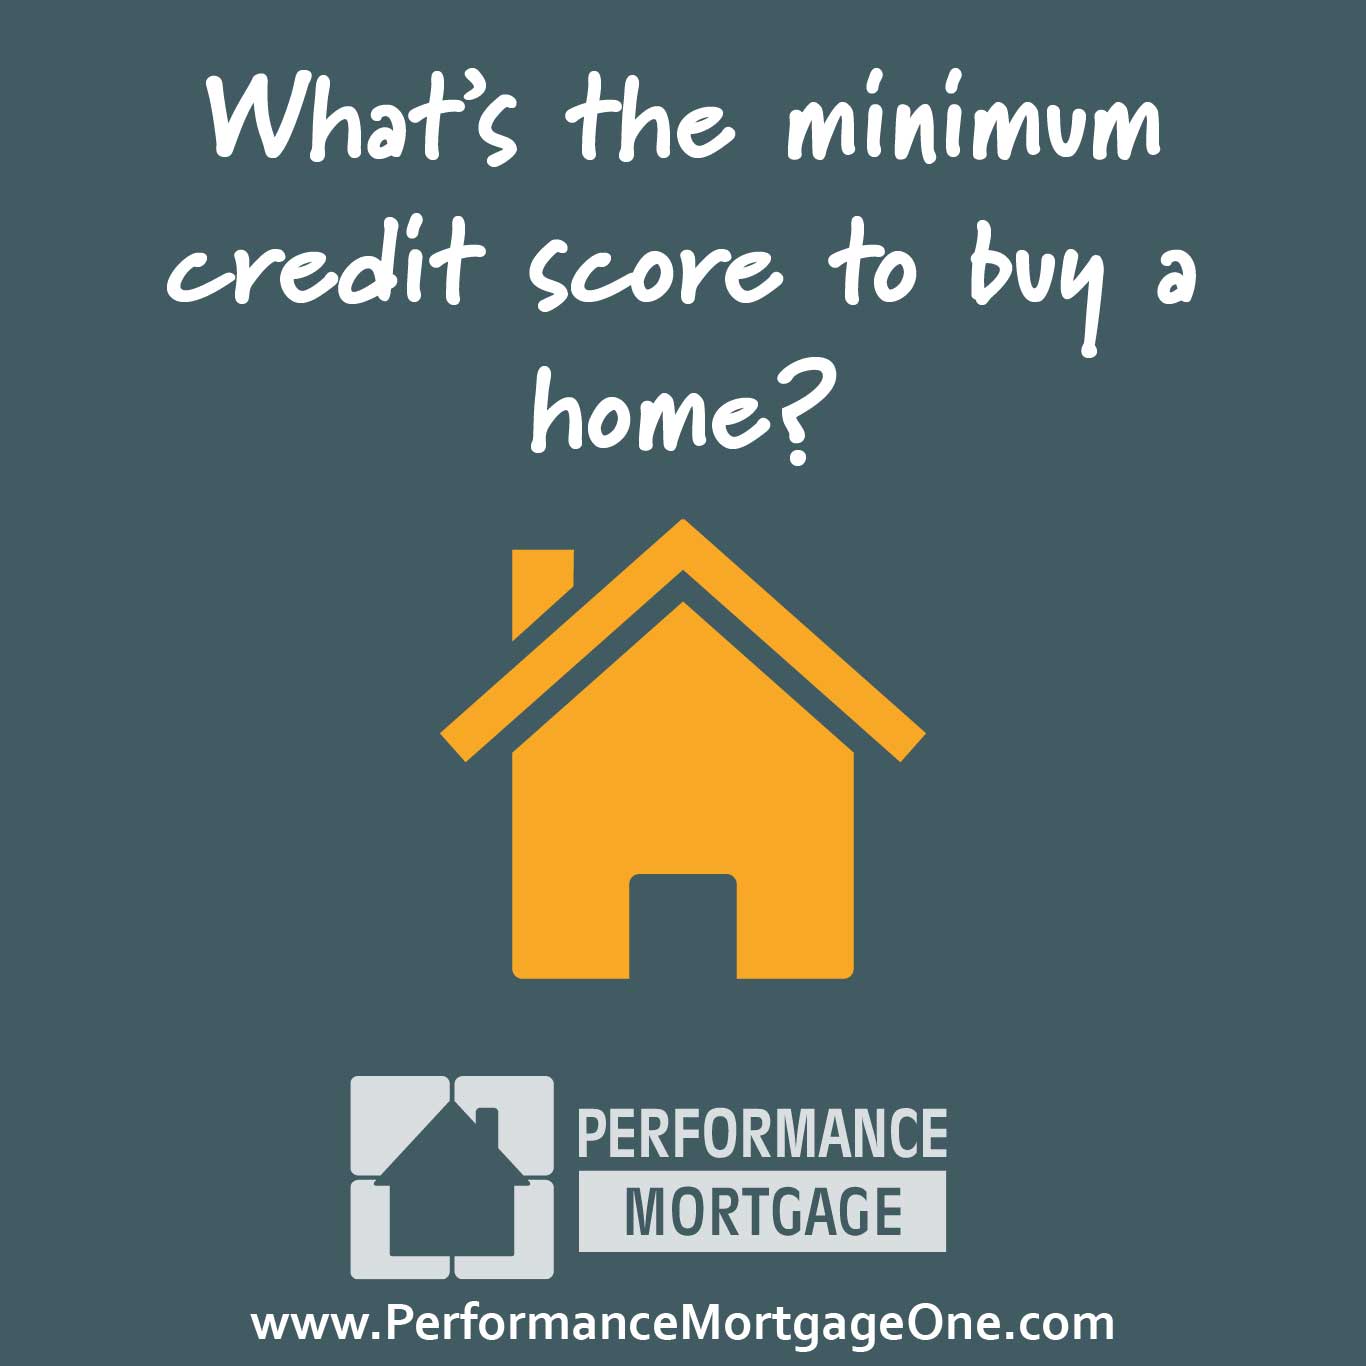 Whatâs the minimum credit score to buy a home?